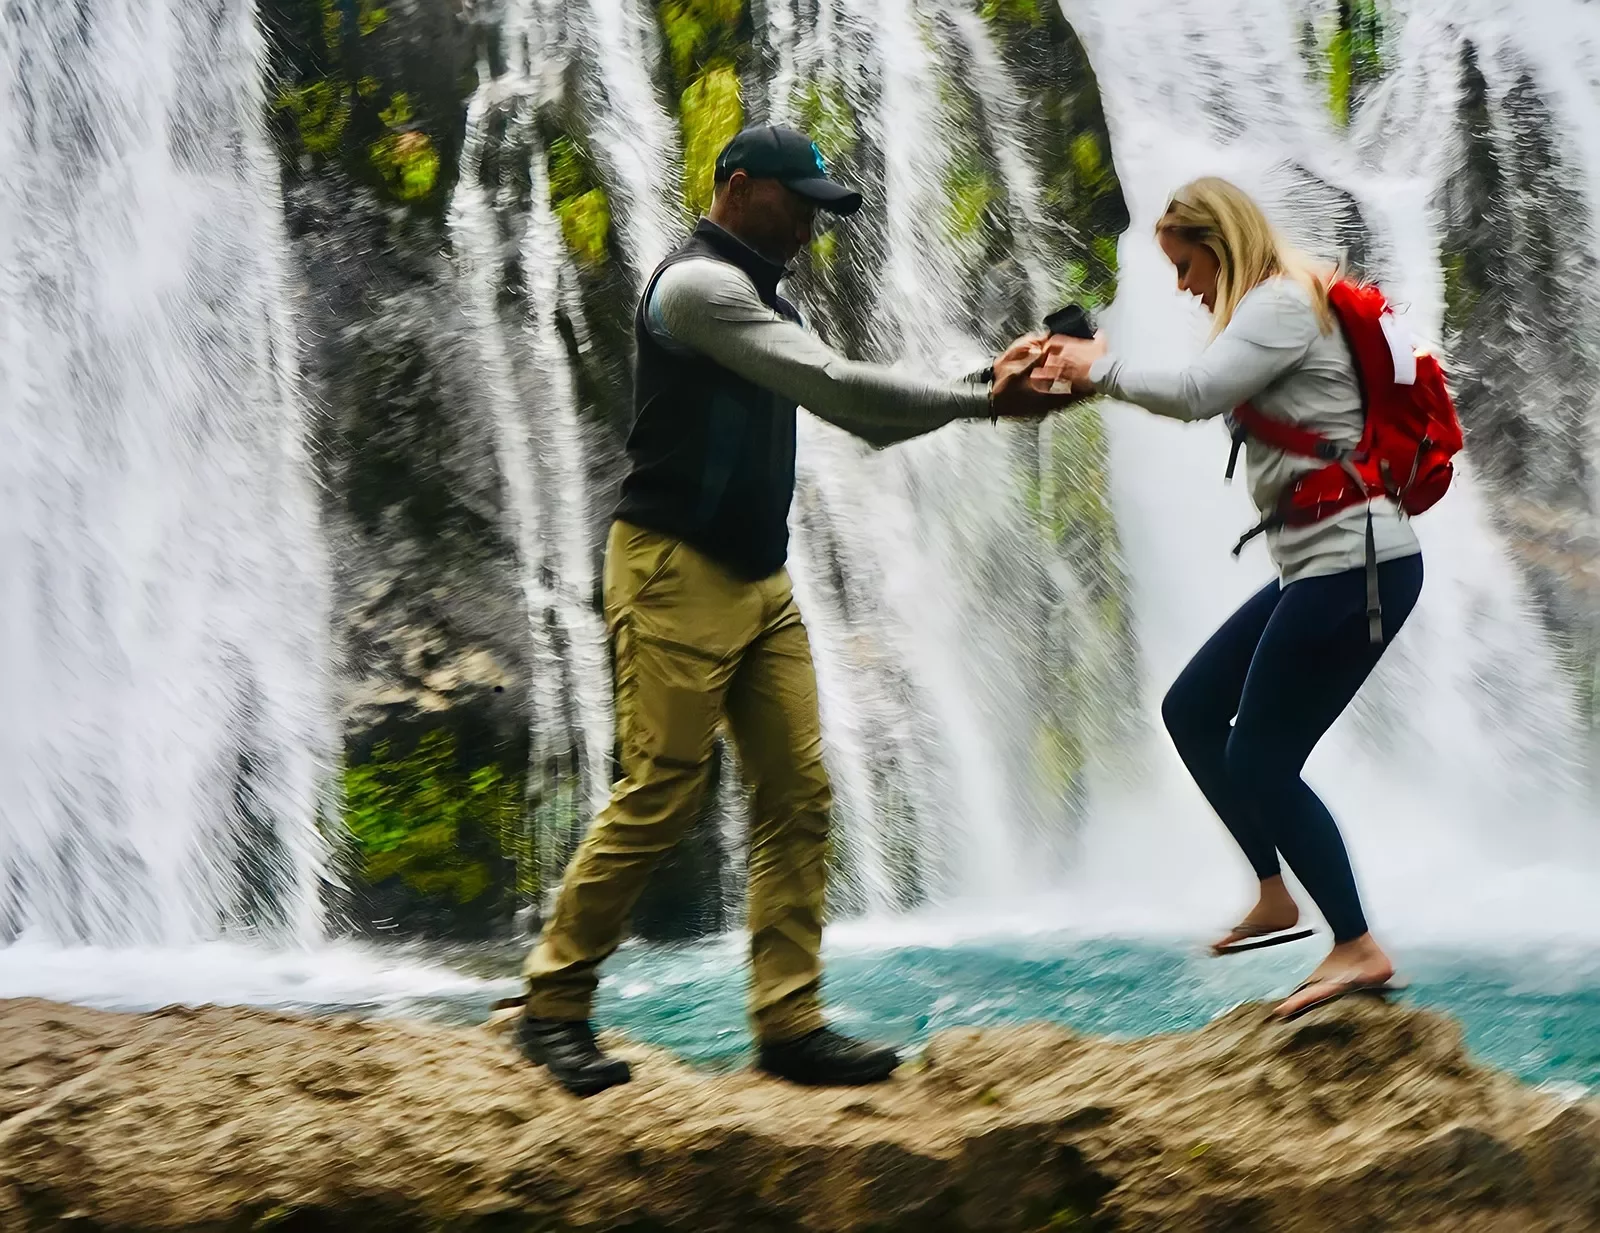 Two guests walking over rocks, waterfall behind them.